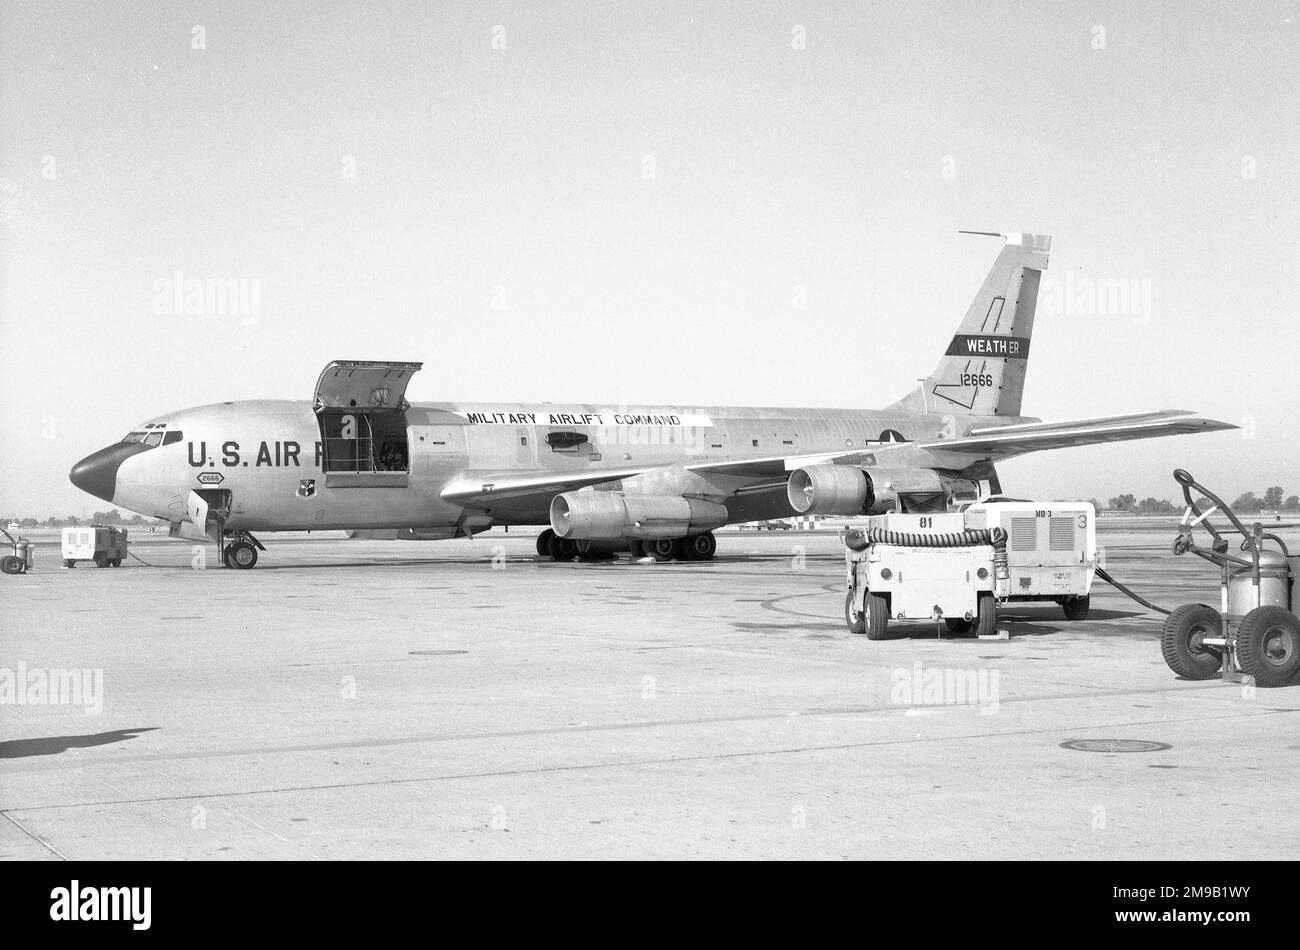 United States Air Force - Boeing WC-135B-BN Stratolifter 61-2666 (msn 18342-C3022), of the 55th Weather Reconnaissance Squadron, at McClellan Air Force Base, Colorado, on 28 October 1967. Stock Photo